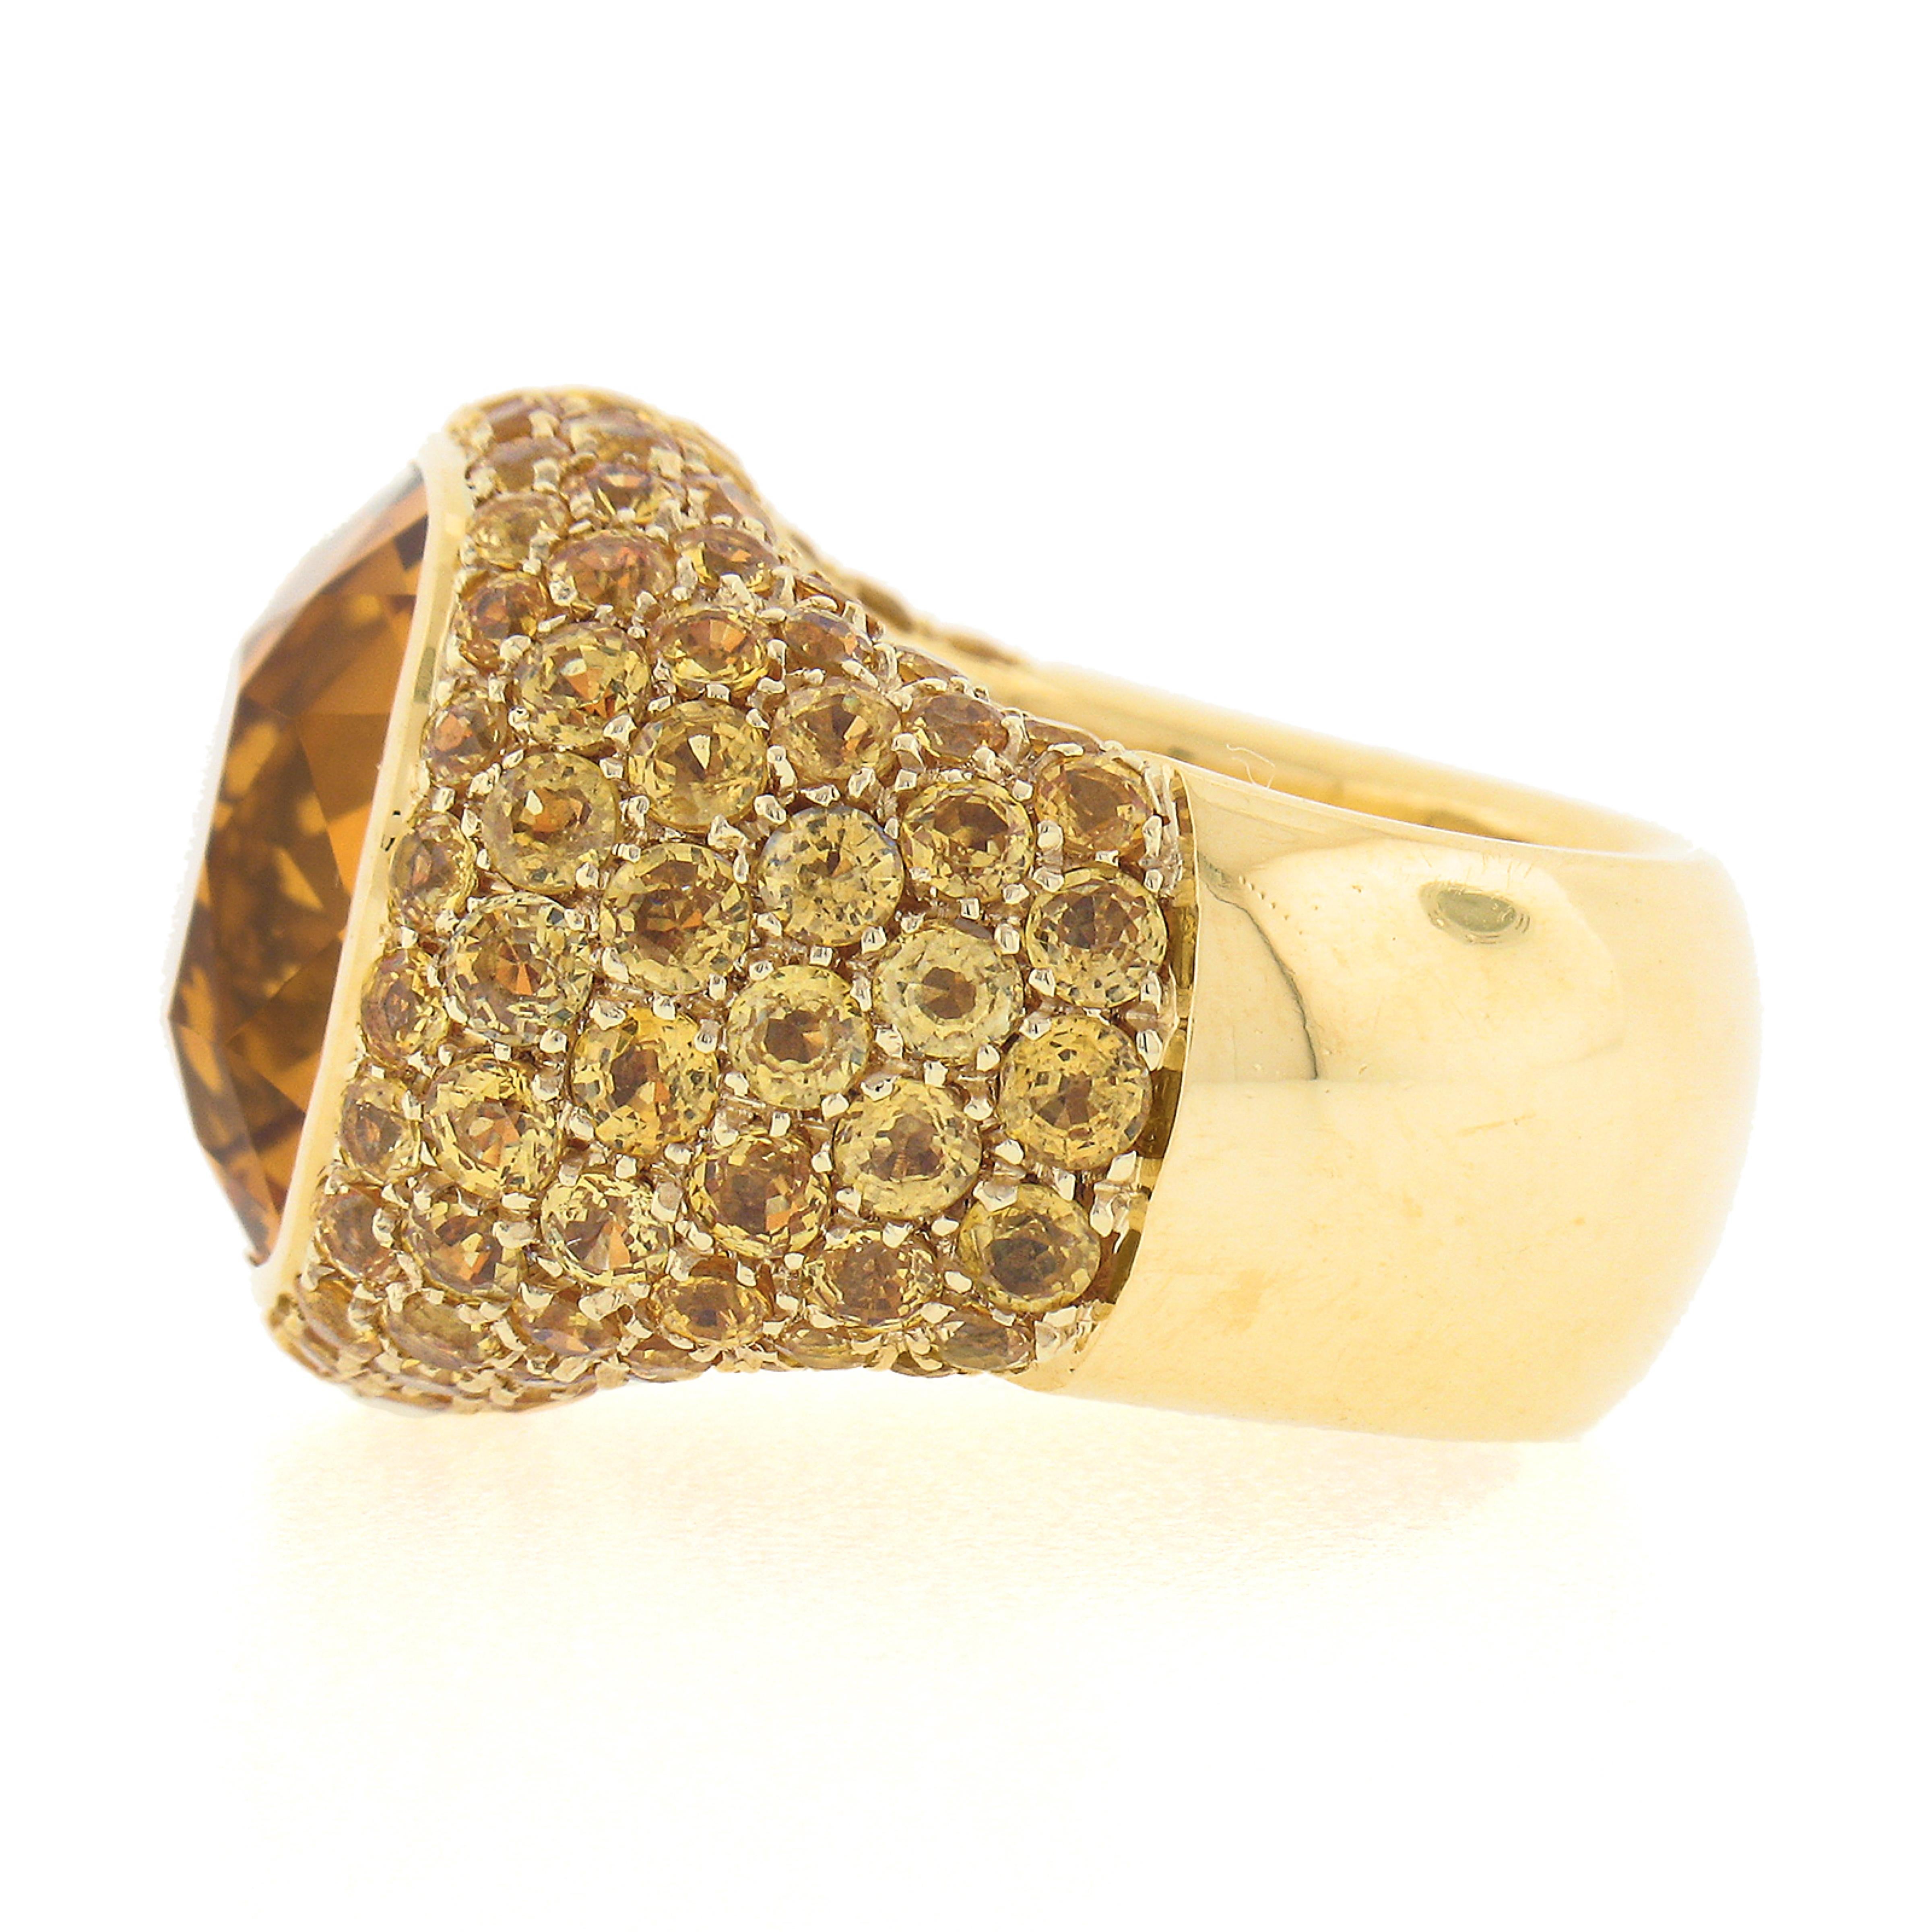 Pasqual Bruni 18k Yellow Gold Large Citrine W/ Yellow Sapphires Cocktail Ring In Excellent Condition For Sale In Montclair, NJ